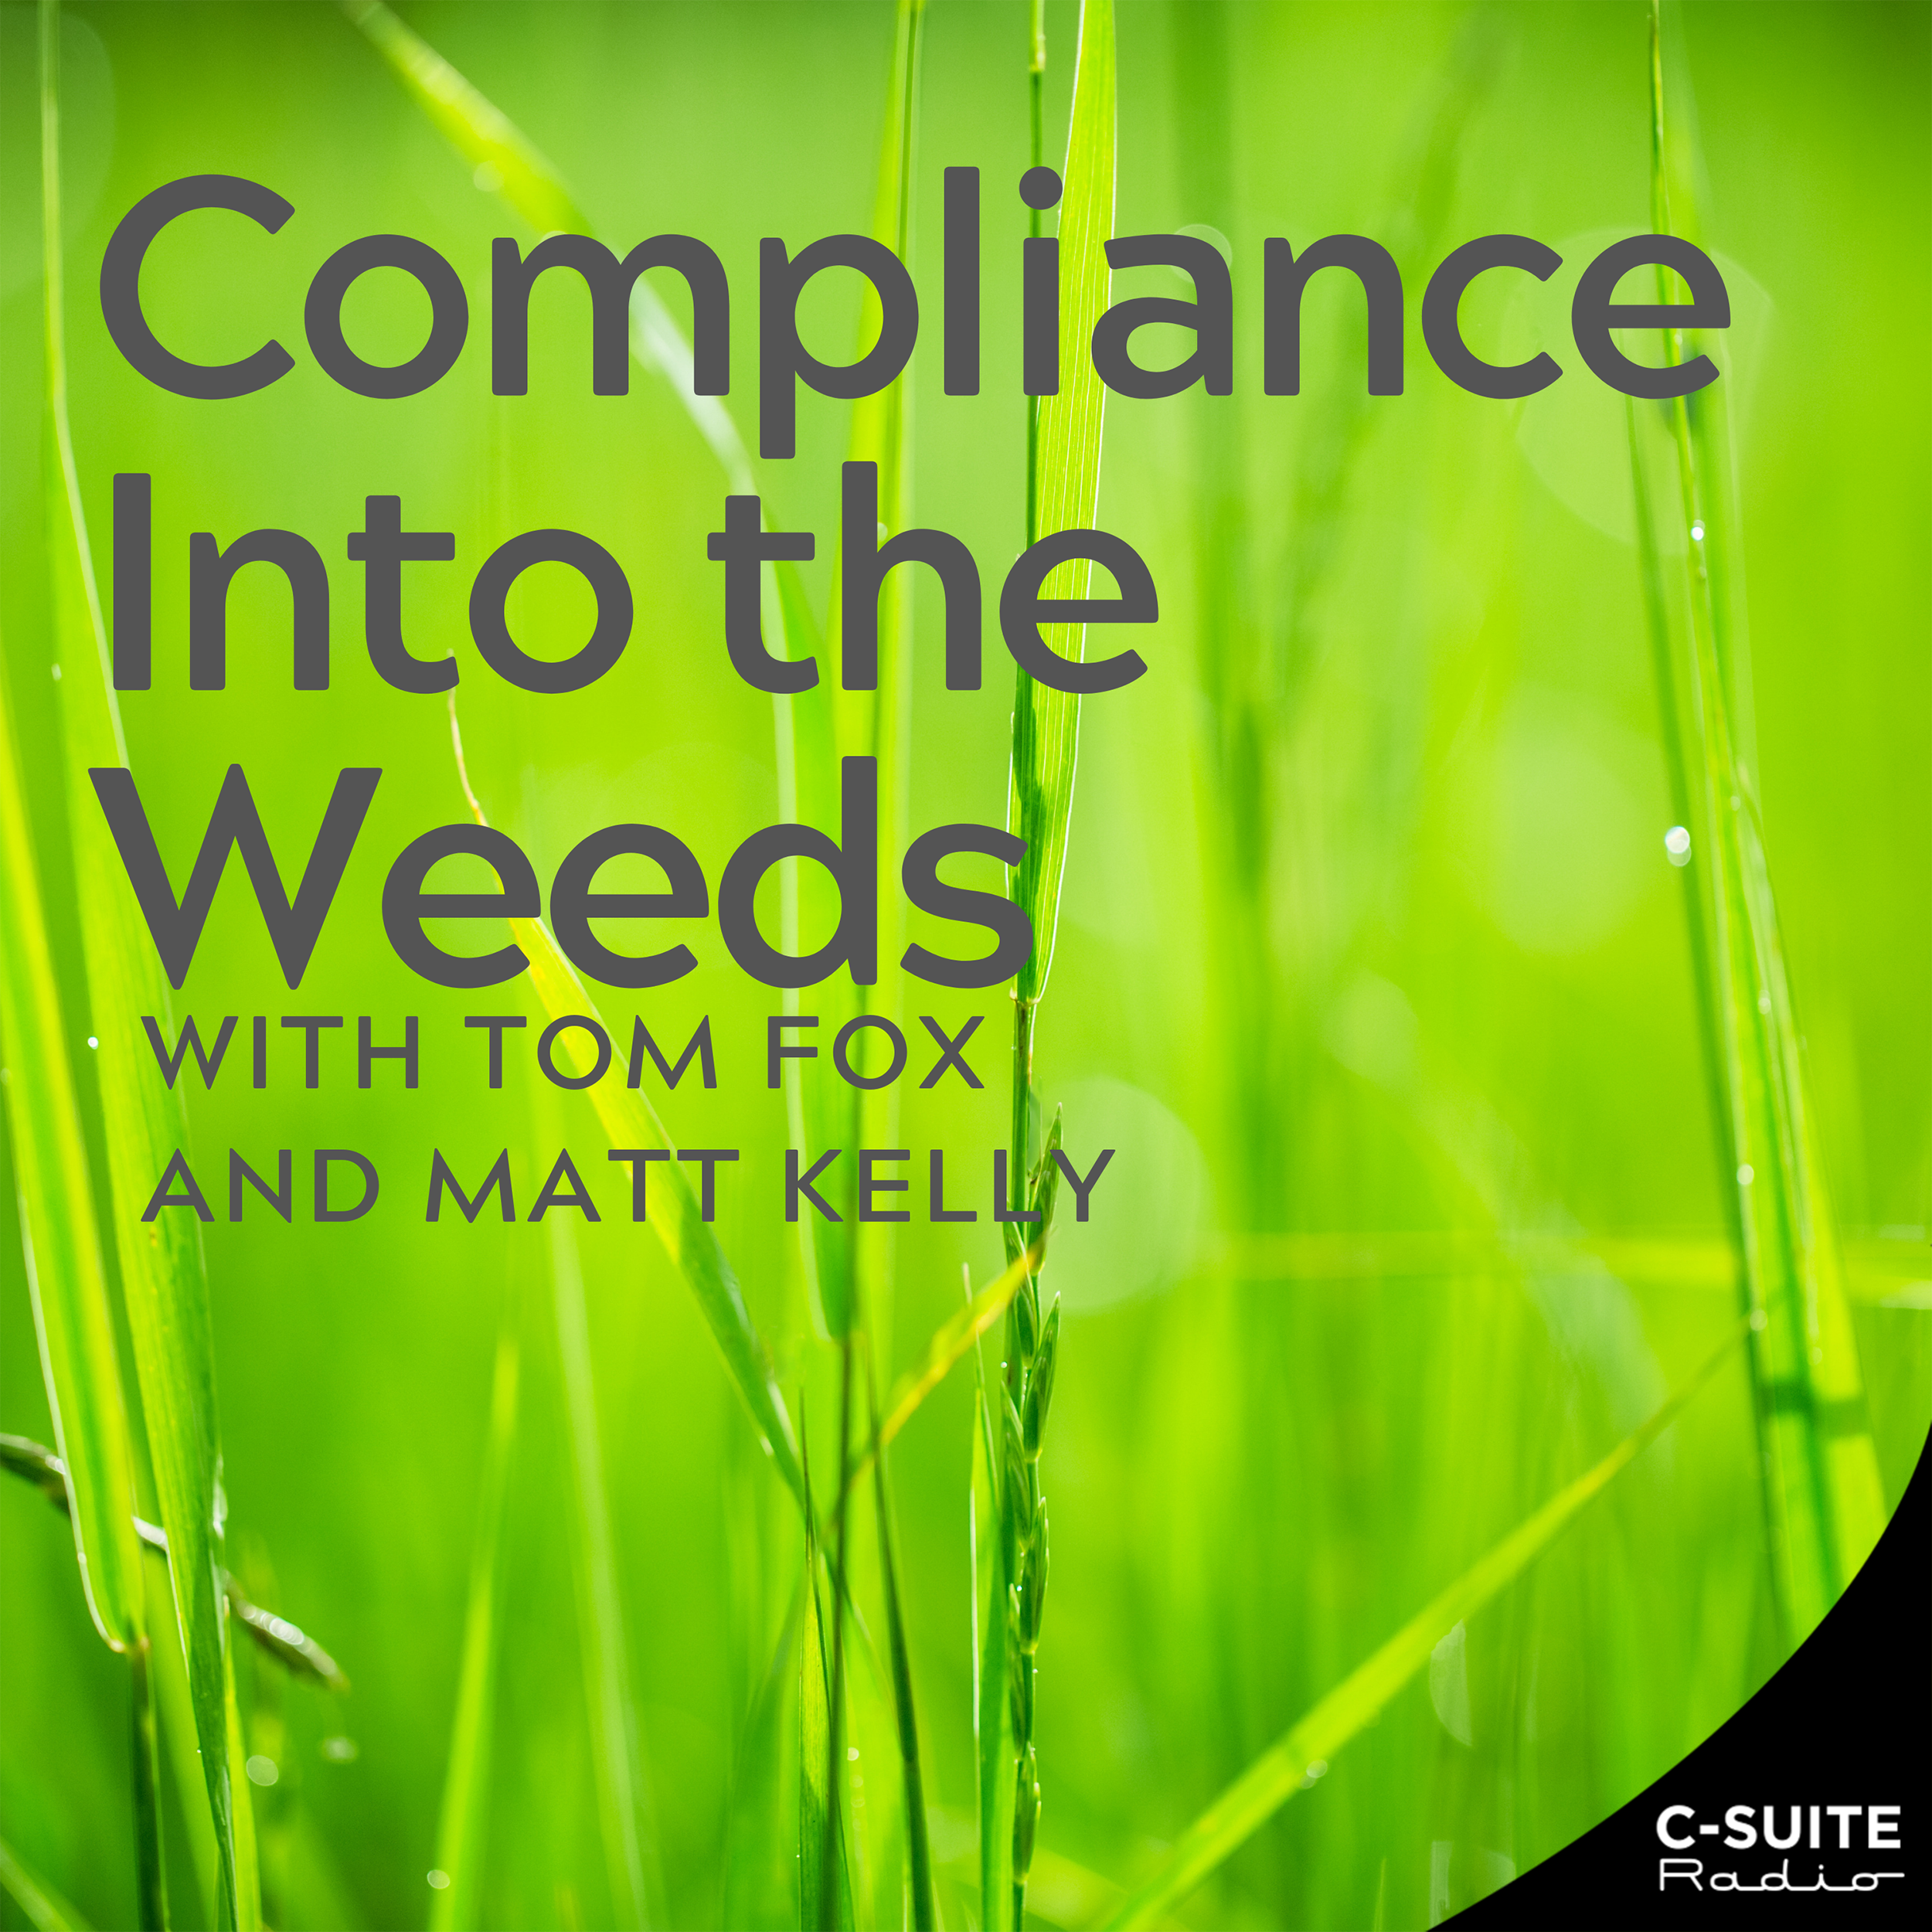 Compliance into the Weeds